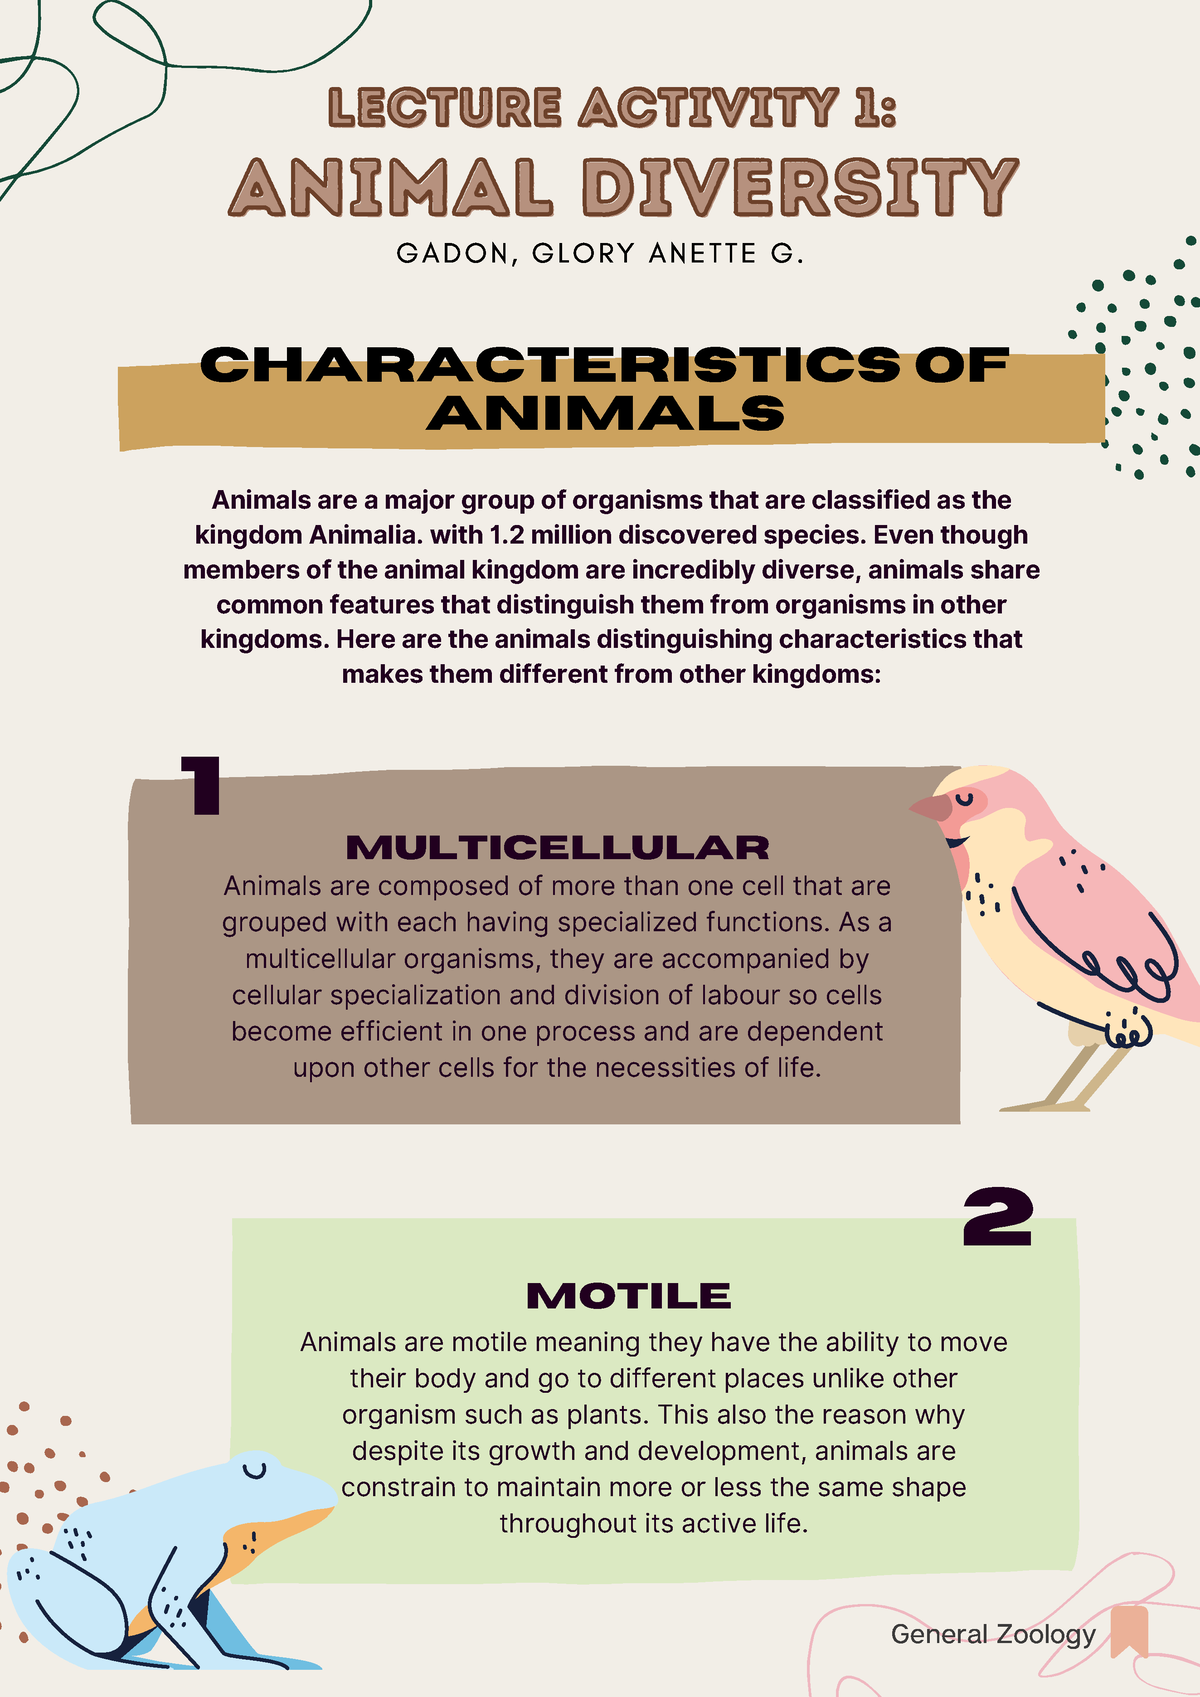 Gadon Animal Diversity (Gen Zoo) - MULTICELLULAR Animals are composed of  more than one cell that are - Studocu